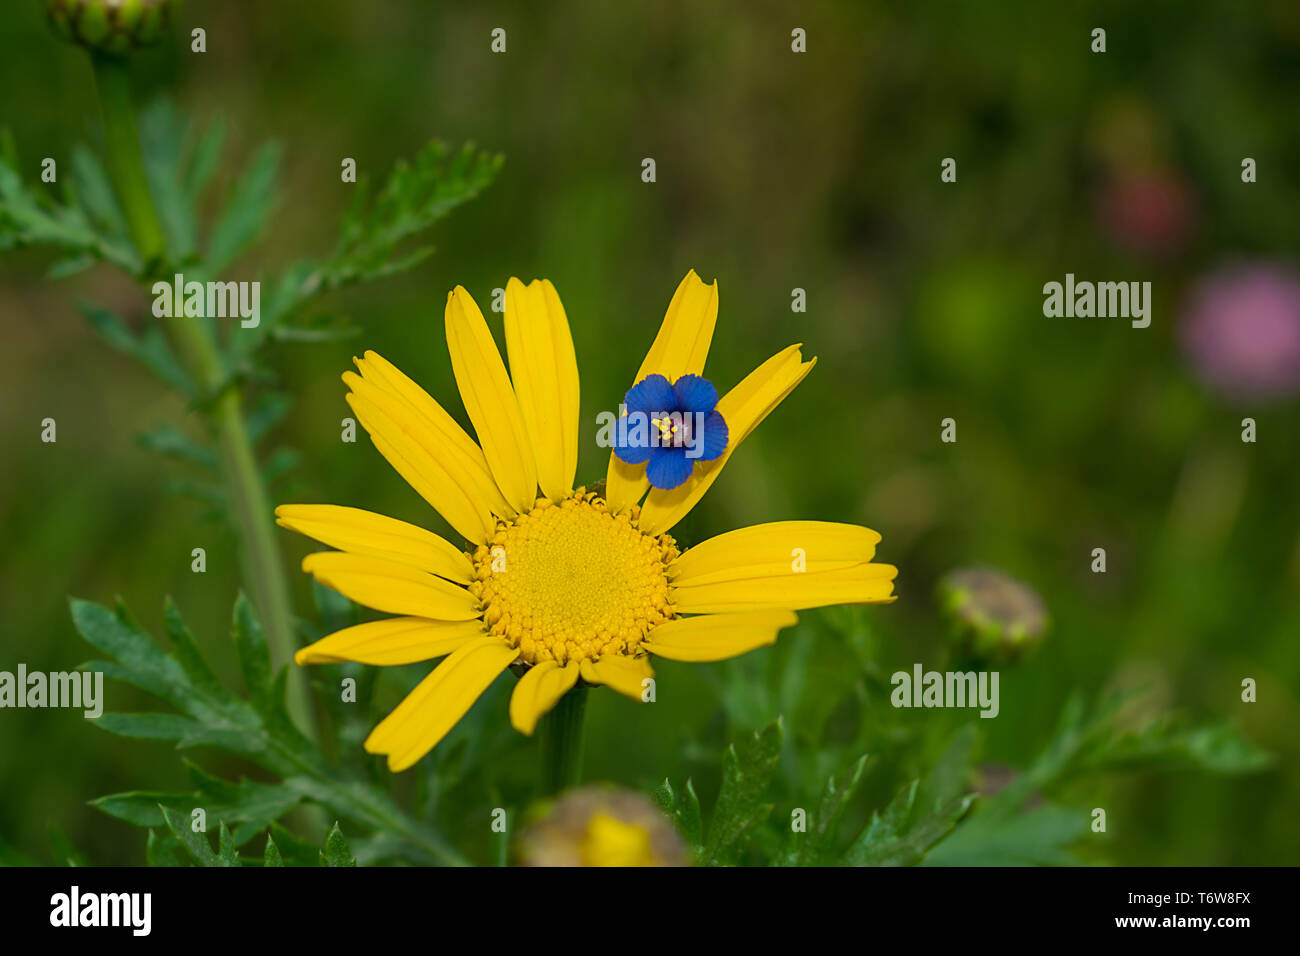 close up of blue flower on a yellow daisy flower in a garden with blurred background. Stock Photo